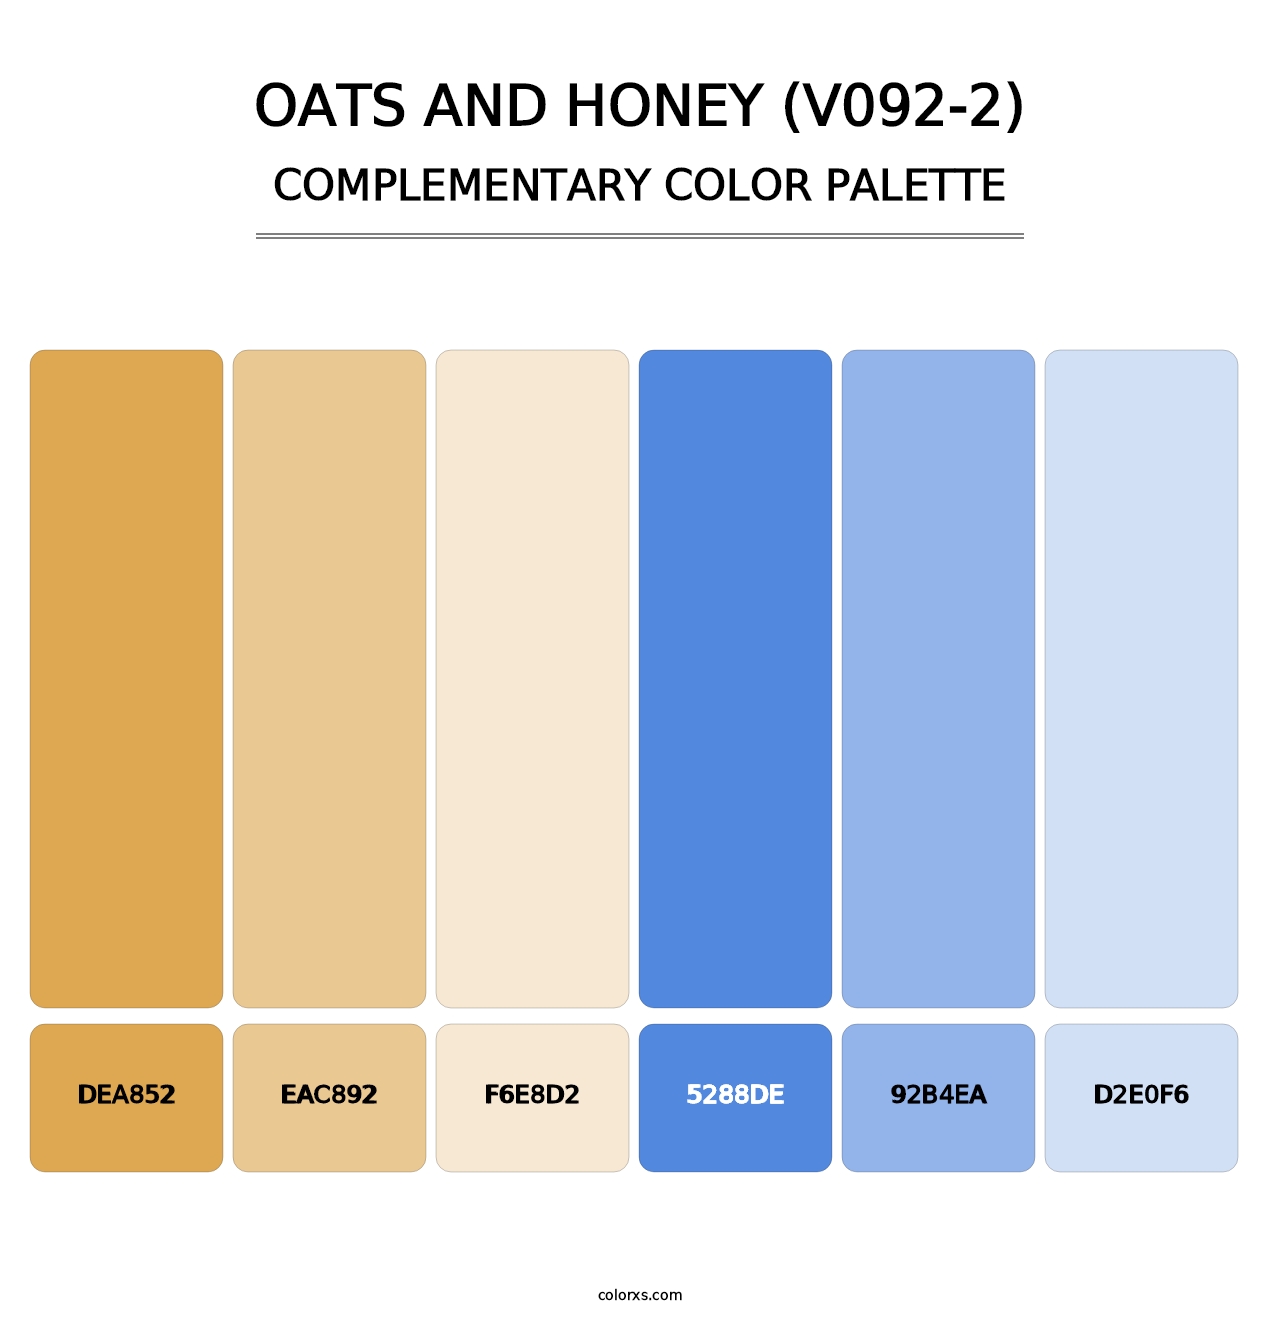 Oats and Honey (V092-2) - Complementary Color Palette